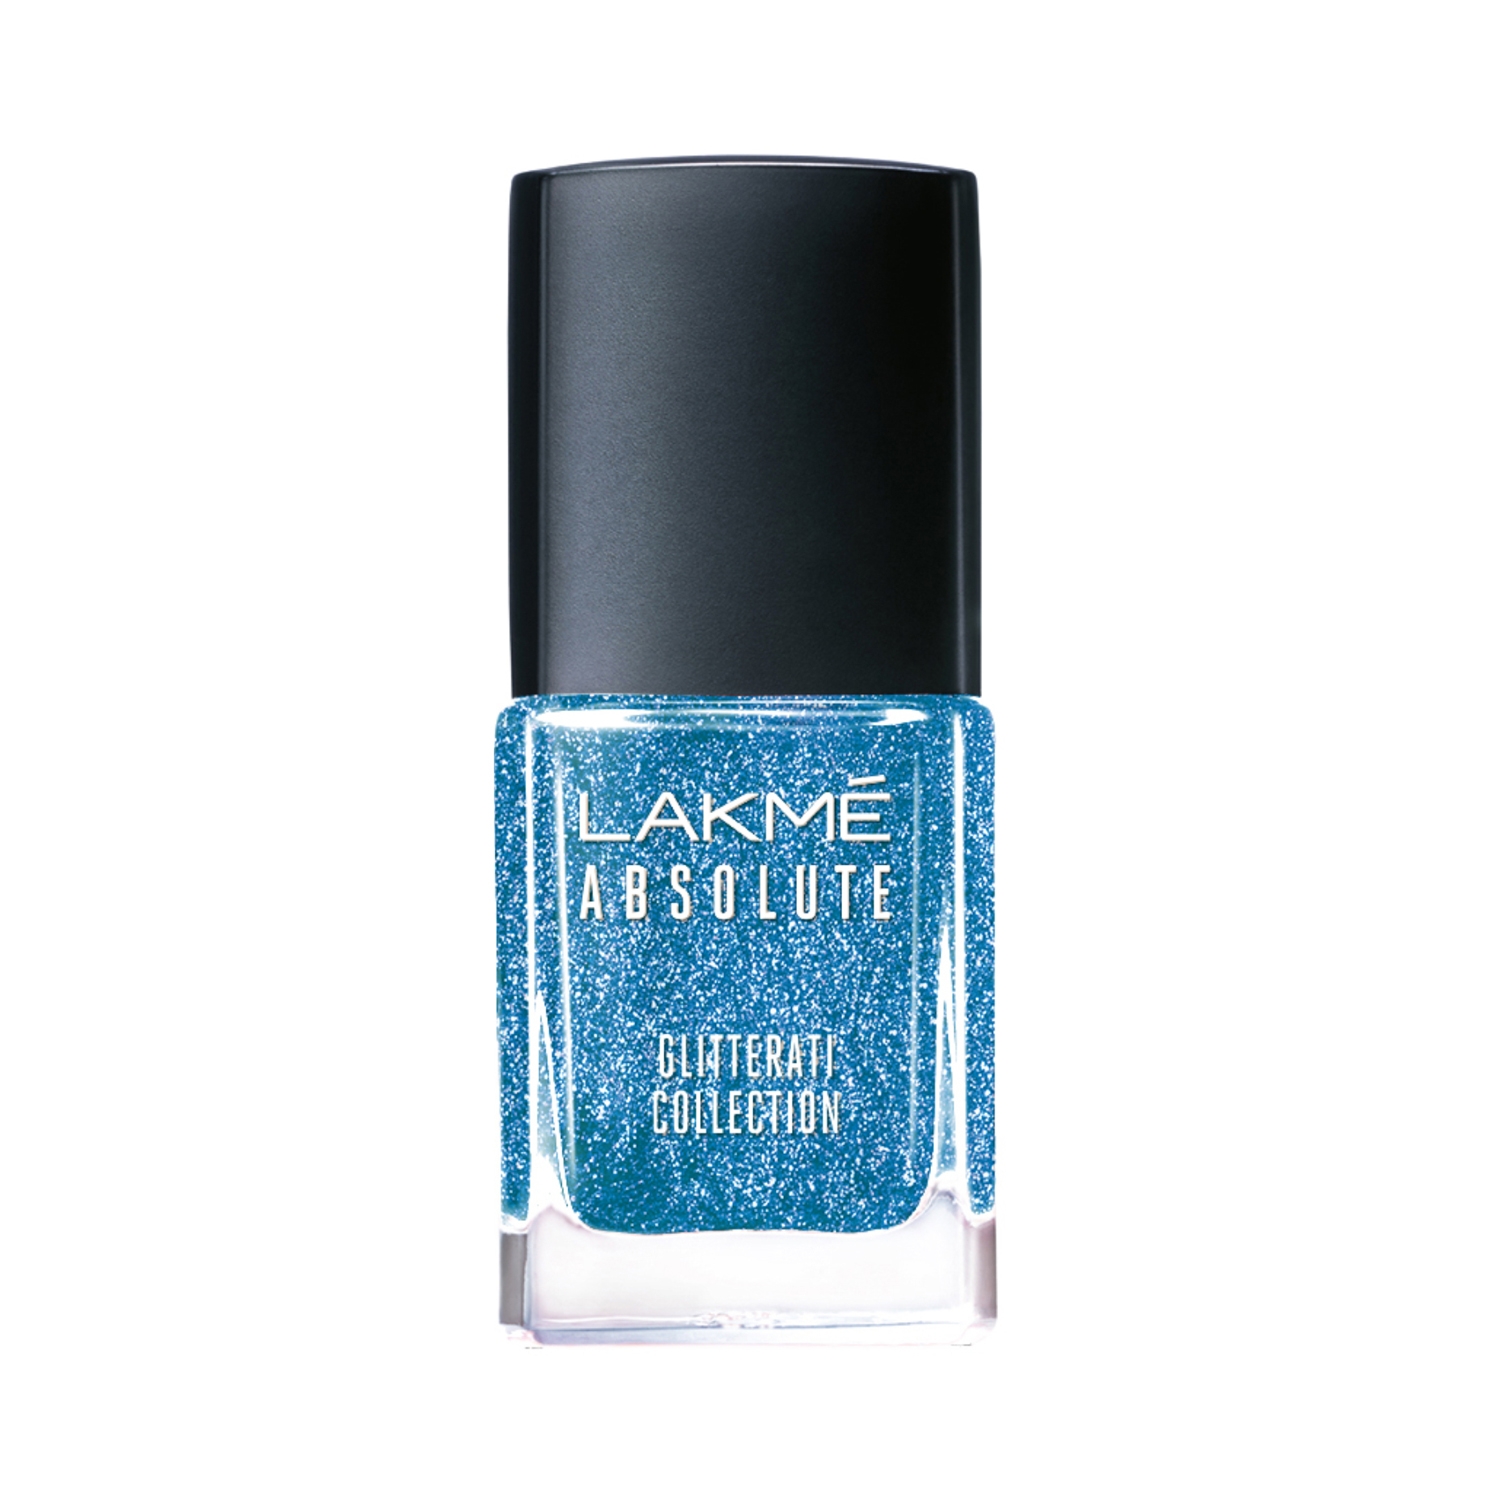 Lakmé Absolute Gel Stylist Nail Color, Ivory Dust, 12 ml Ivory Dust - Price  in India, Buy Lakmé Absolute Gel Stylist Nail Color, Ivory Dust, 12 ml  Ivory Dust Online In India,